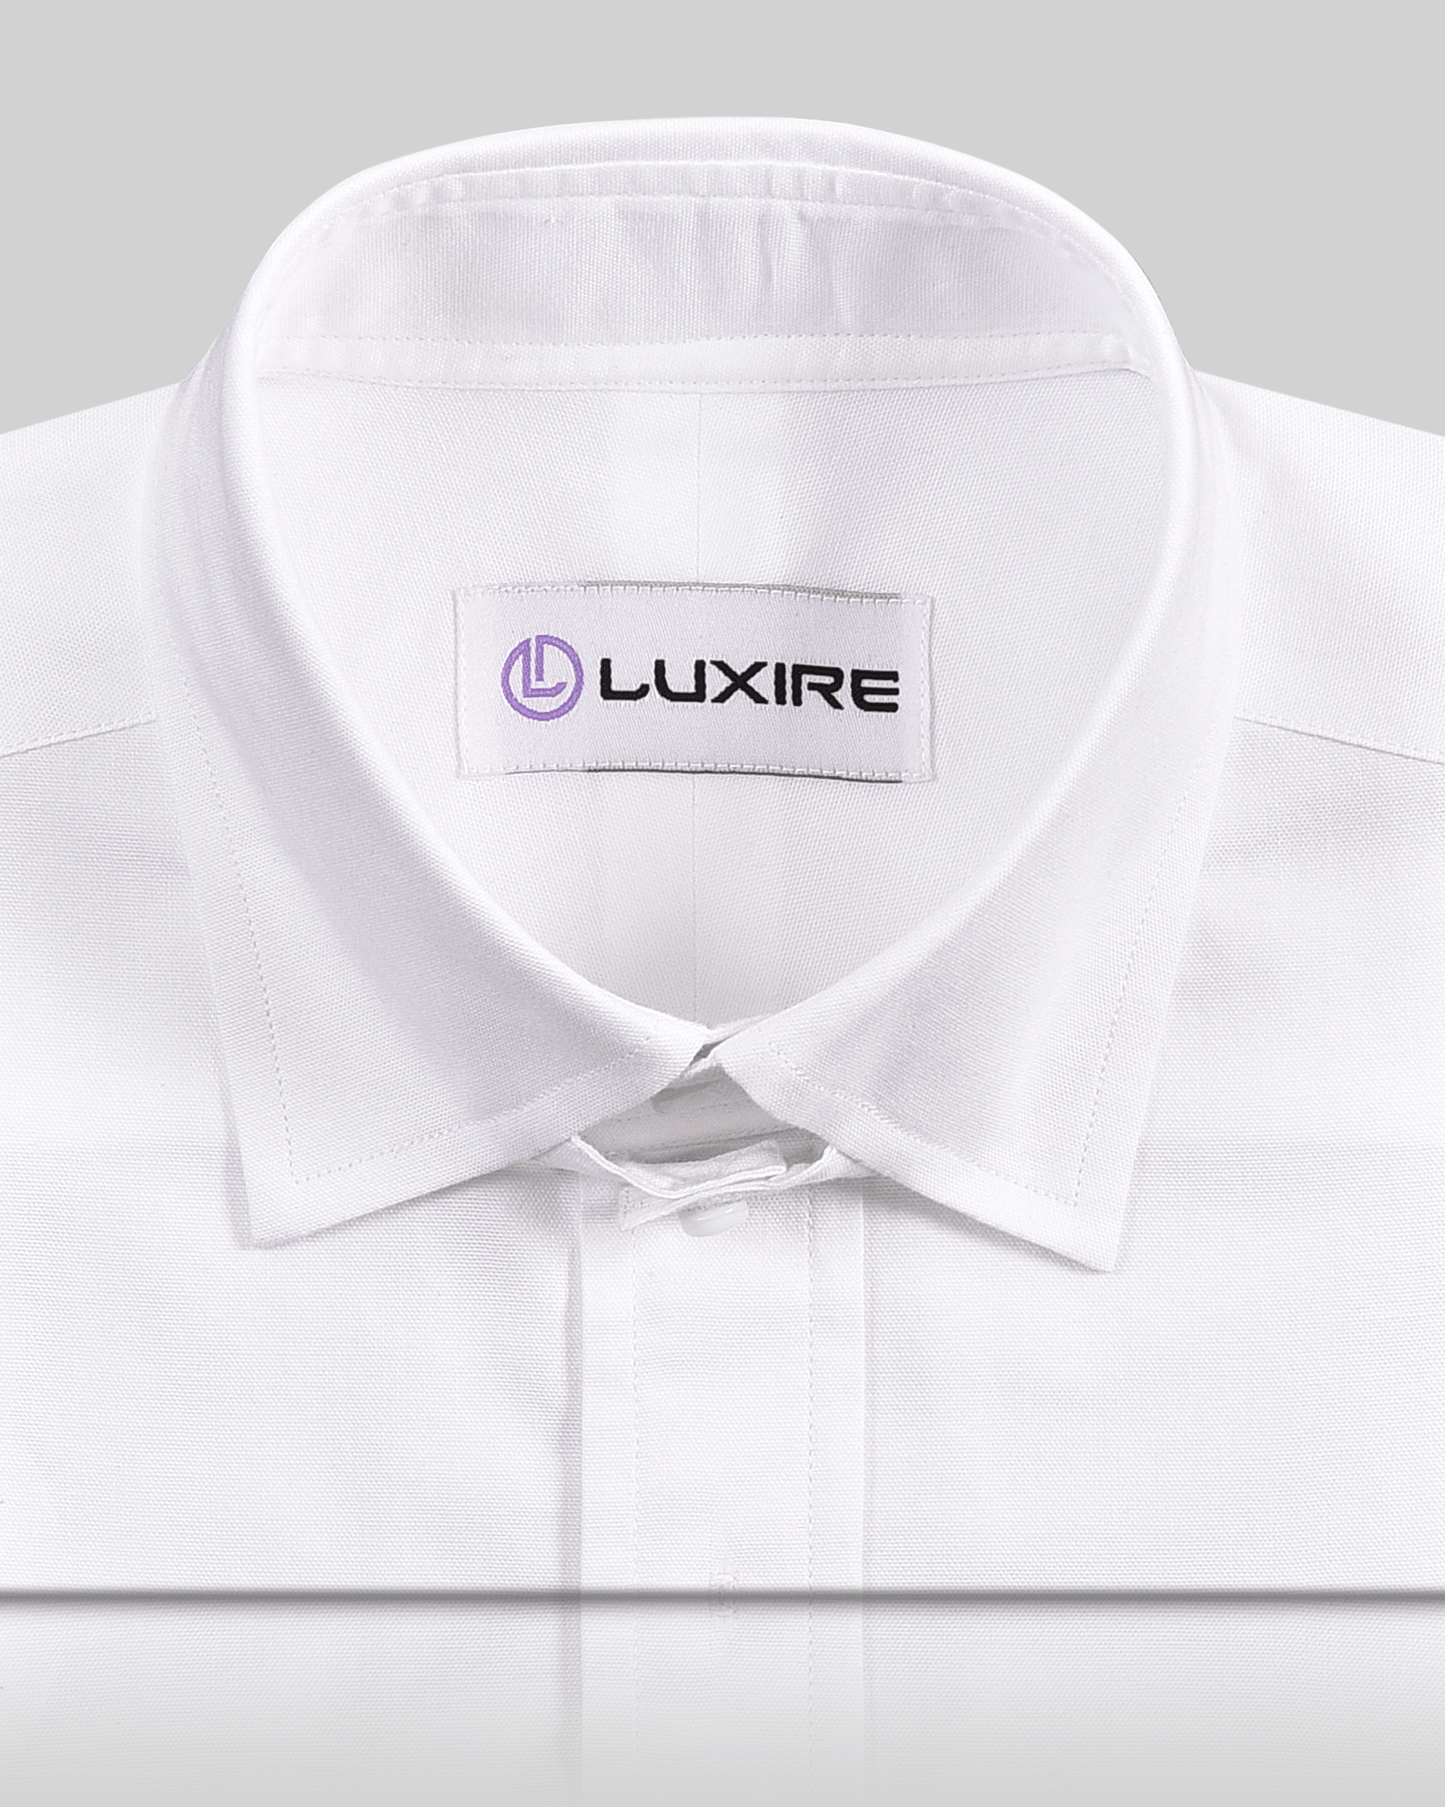 Collar of the custom oxford shirt for men by Luxire in pinpoint white